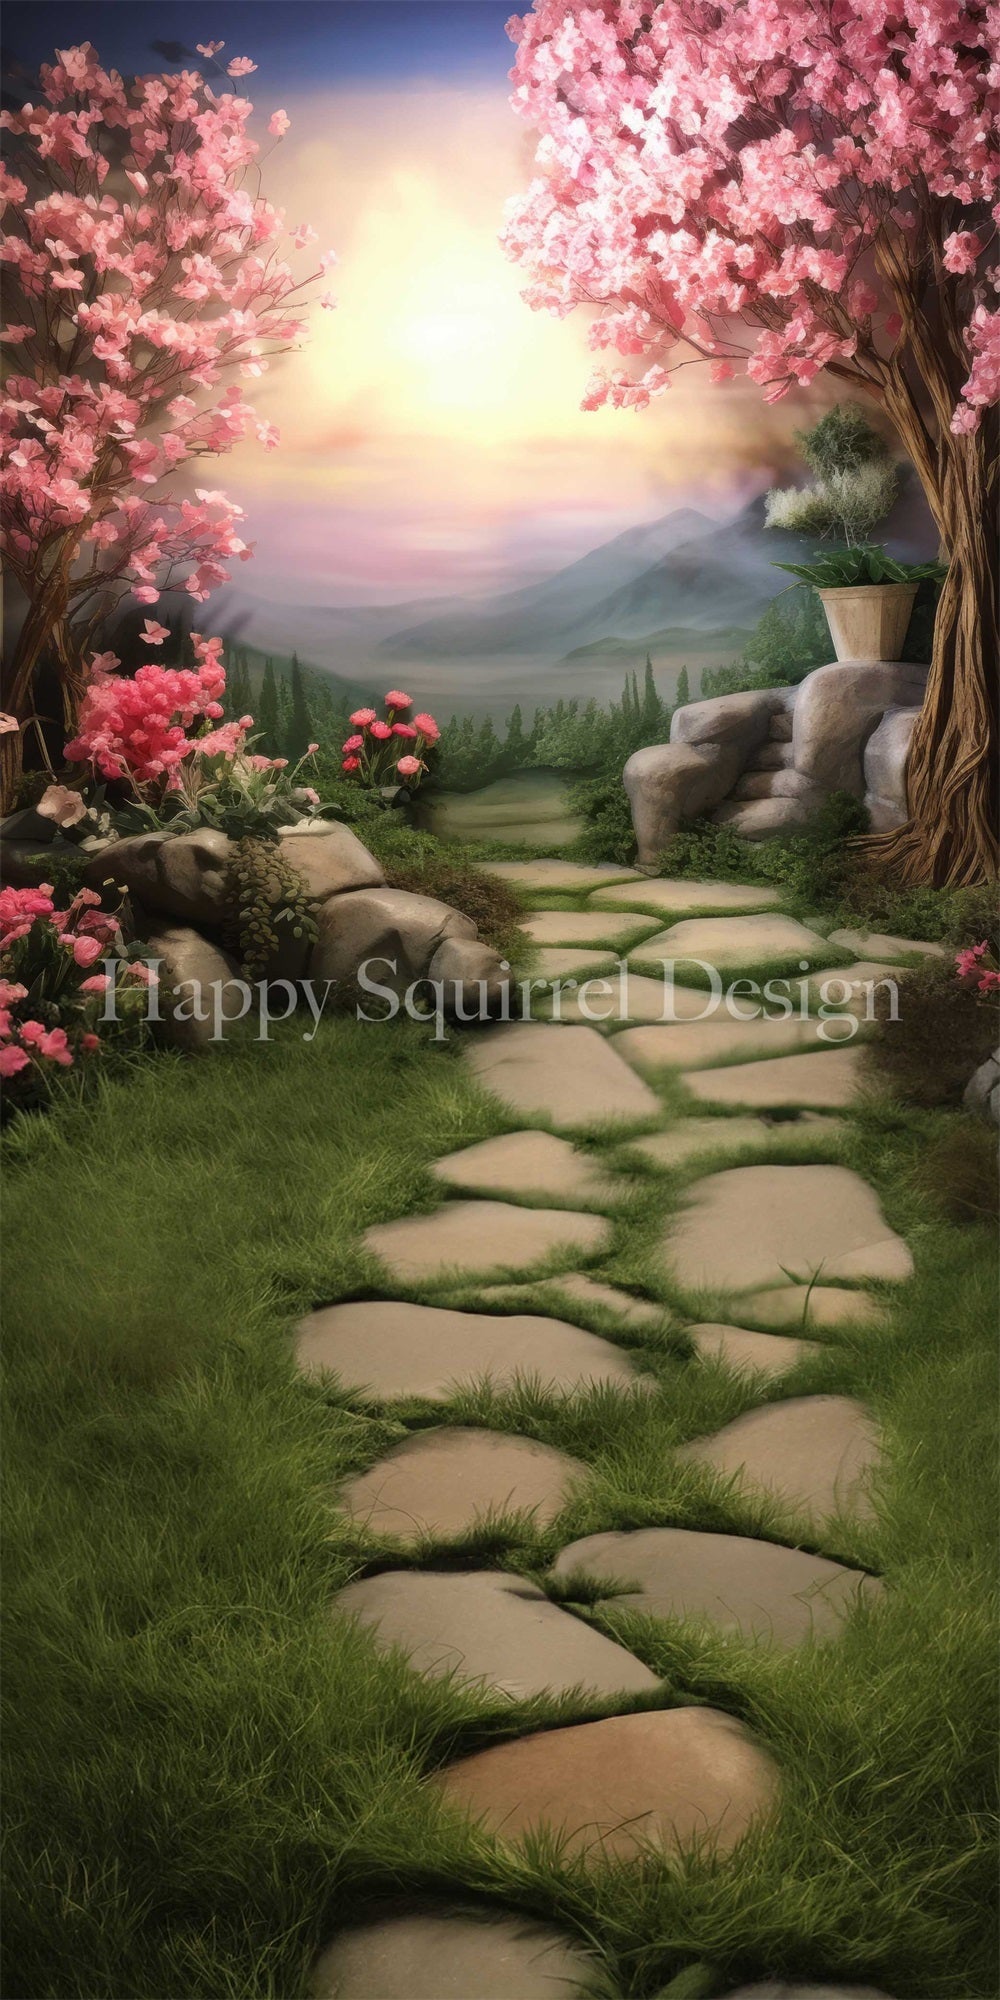 Kate Sweep Spring Fantasy Bokeh Pink Cherry Blossom Flower Forest Mountain Green Meadow Stone Road Backdrop Designed by Happy Squirrel Design